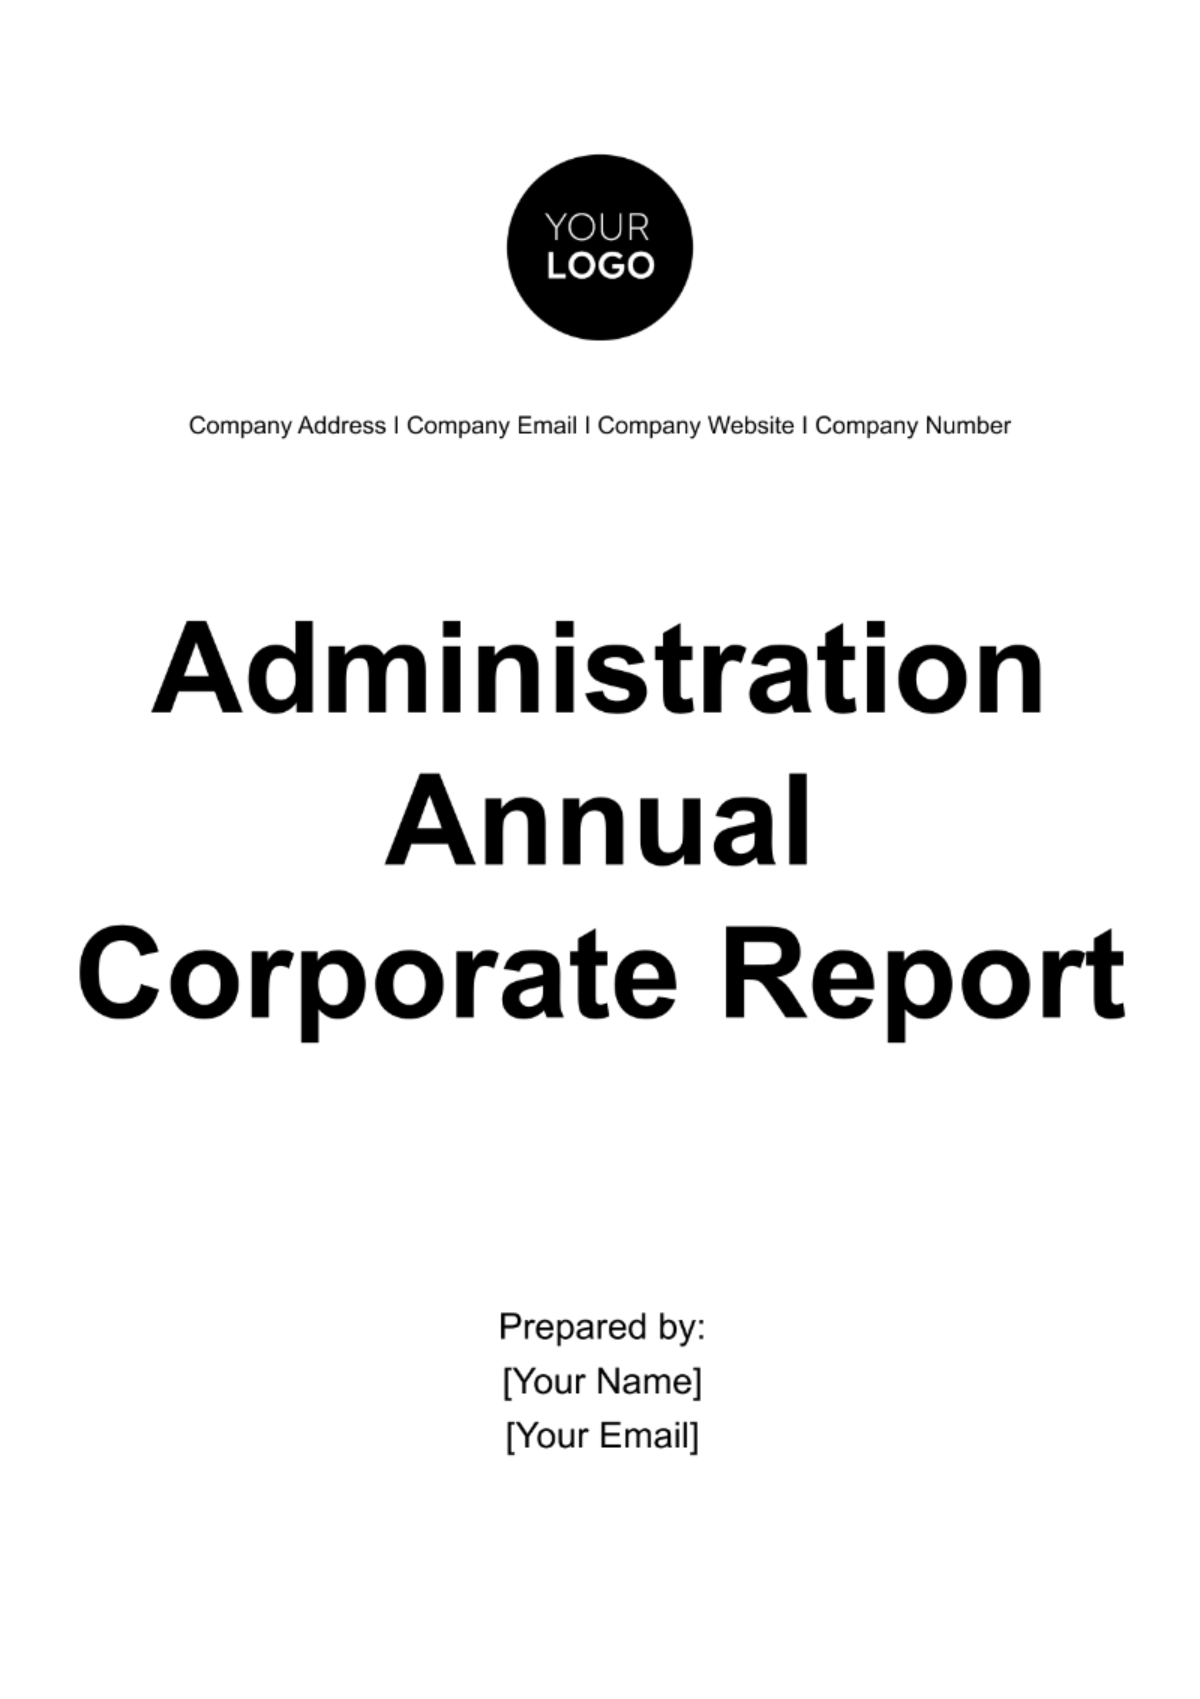 Administration Annual Corporate Report Template